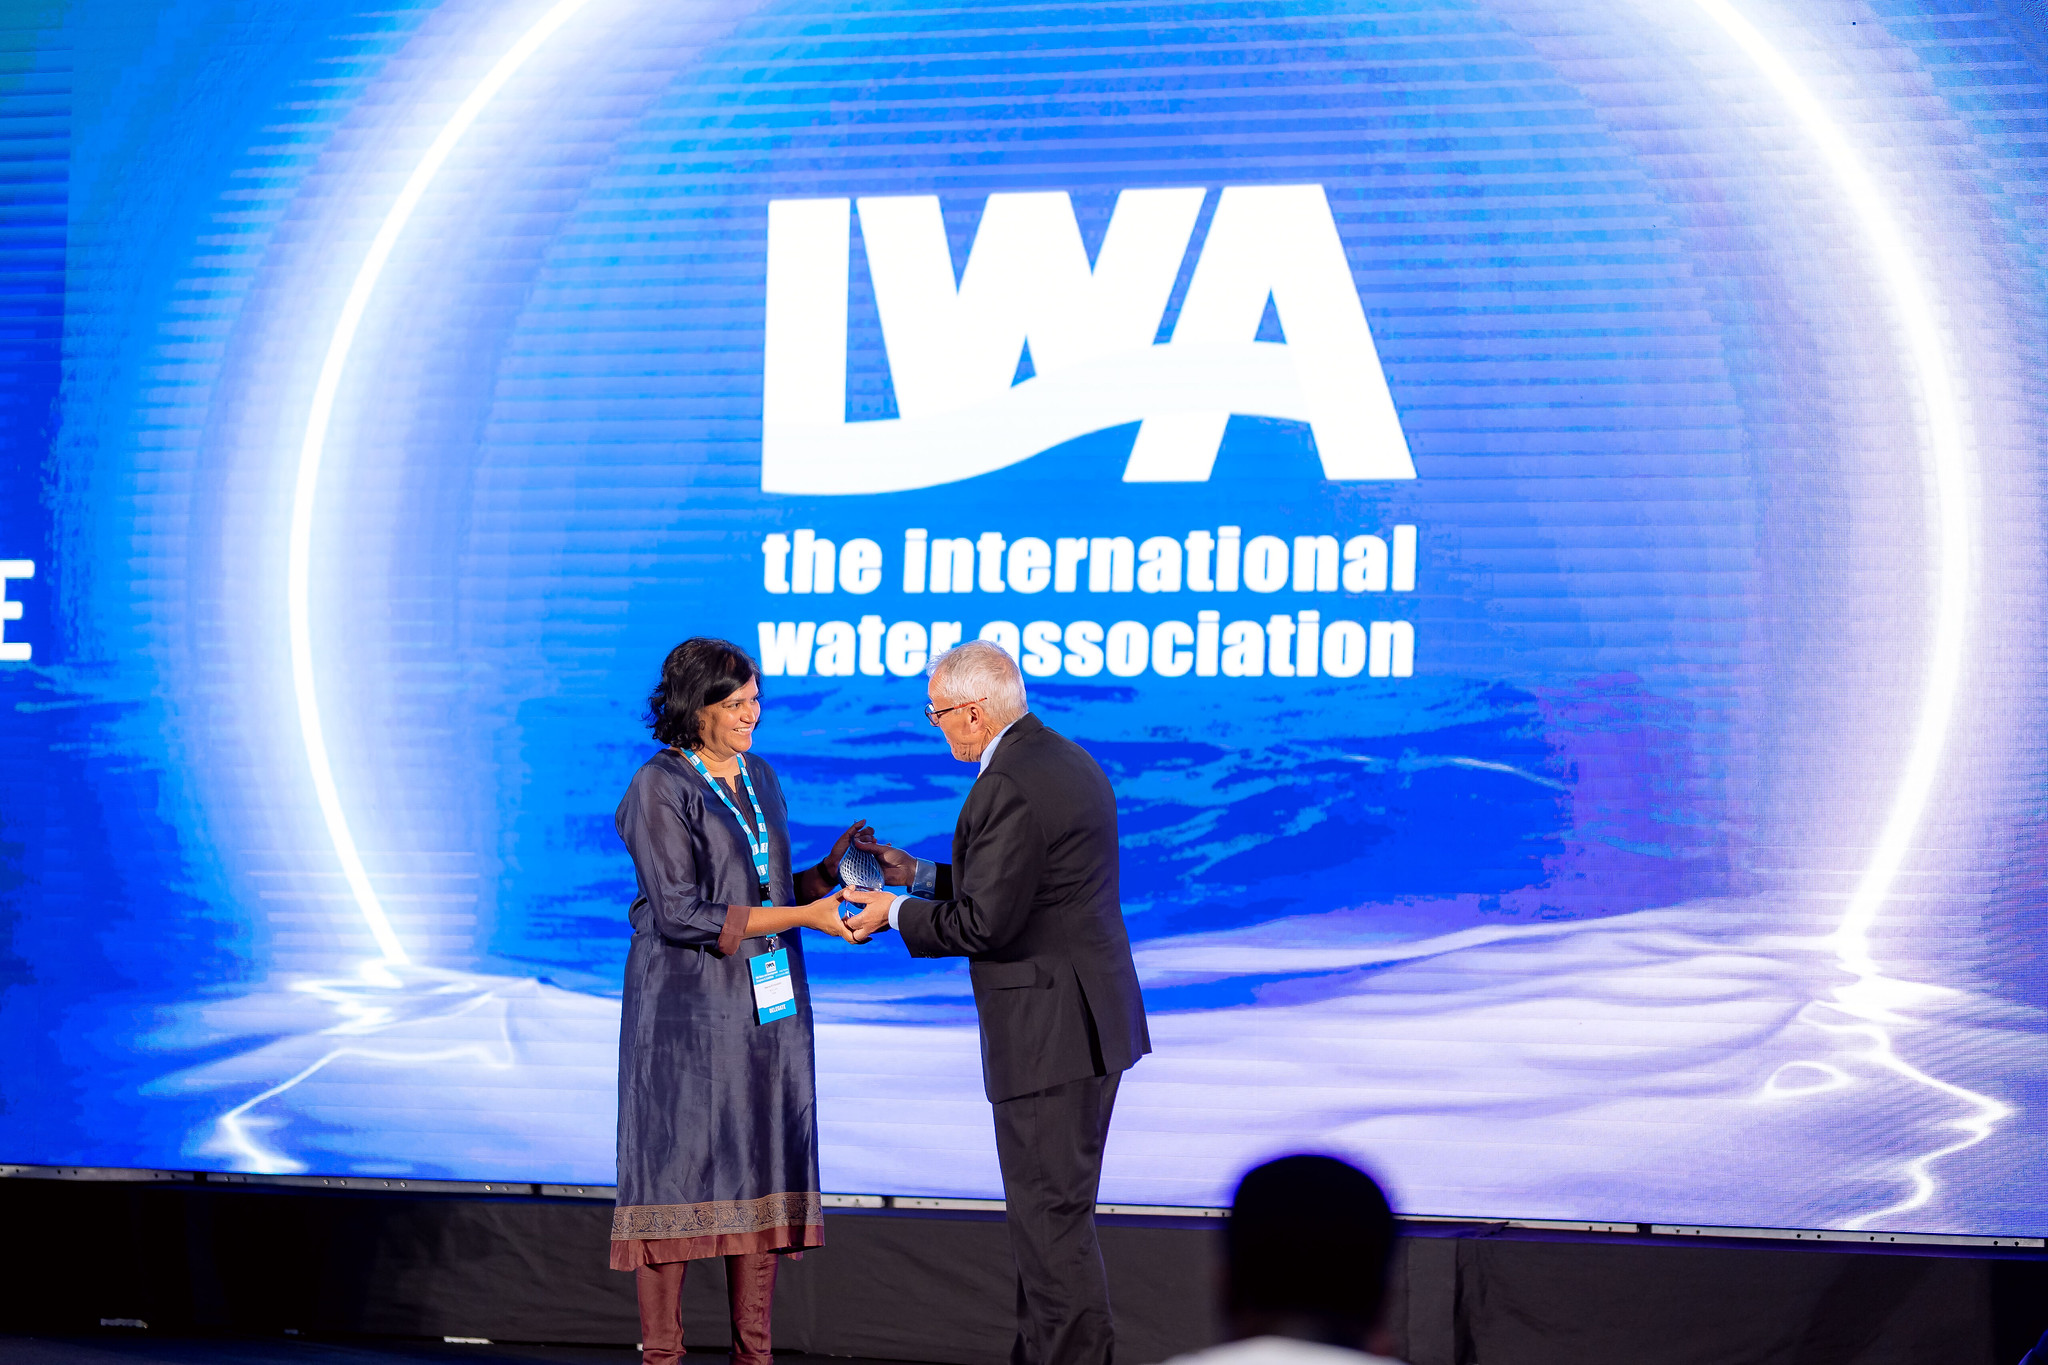 Founder and Executive Director of Bengaluru-based WELL Labs, Dr Veena Srinivasan, receives the International Water Association’s Water and Development Award for Research from Tom Mollenkopf, IWA President and Board Member, at Kigali, Rwanda on Sunday. Credit: IWA